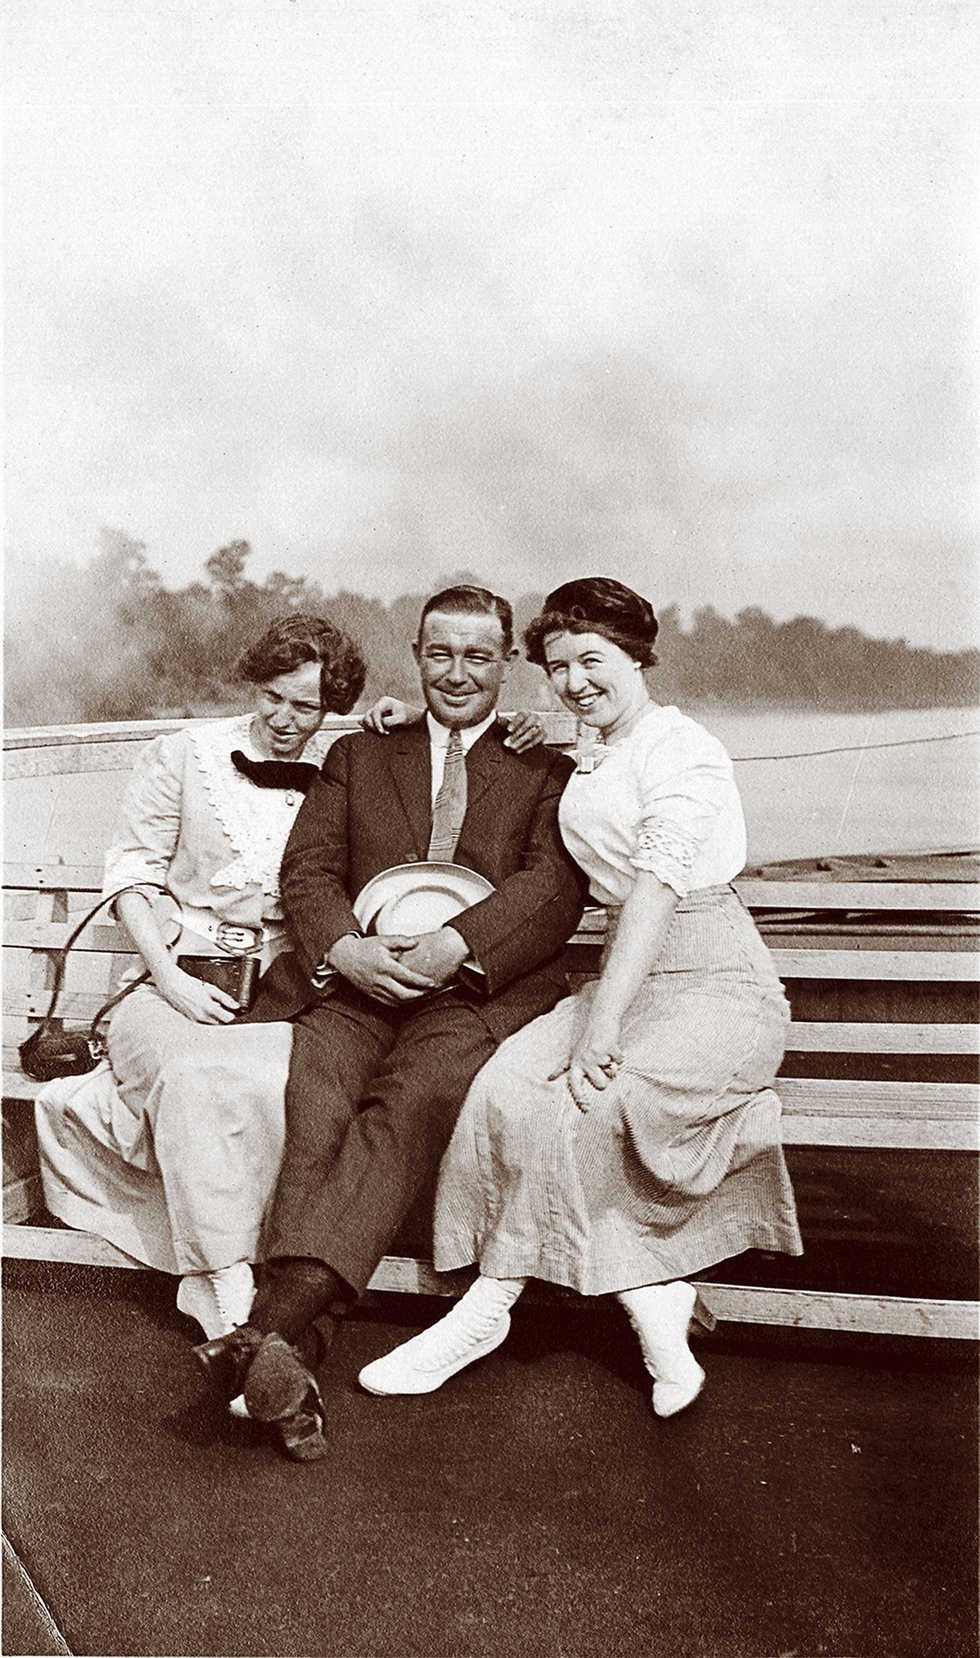 The caption says it all: “Contented: Lena, Joe, Agnes.” That’s Joe Bennett in the center, in this tranquil boating scene.